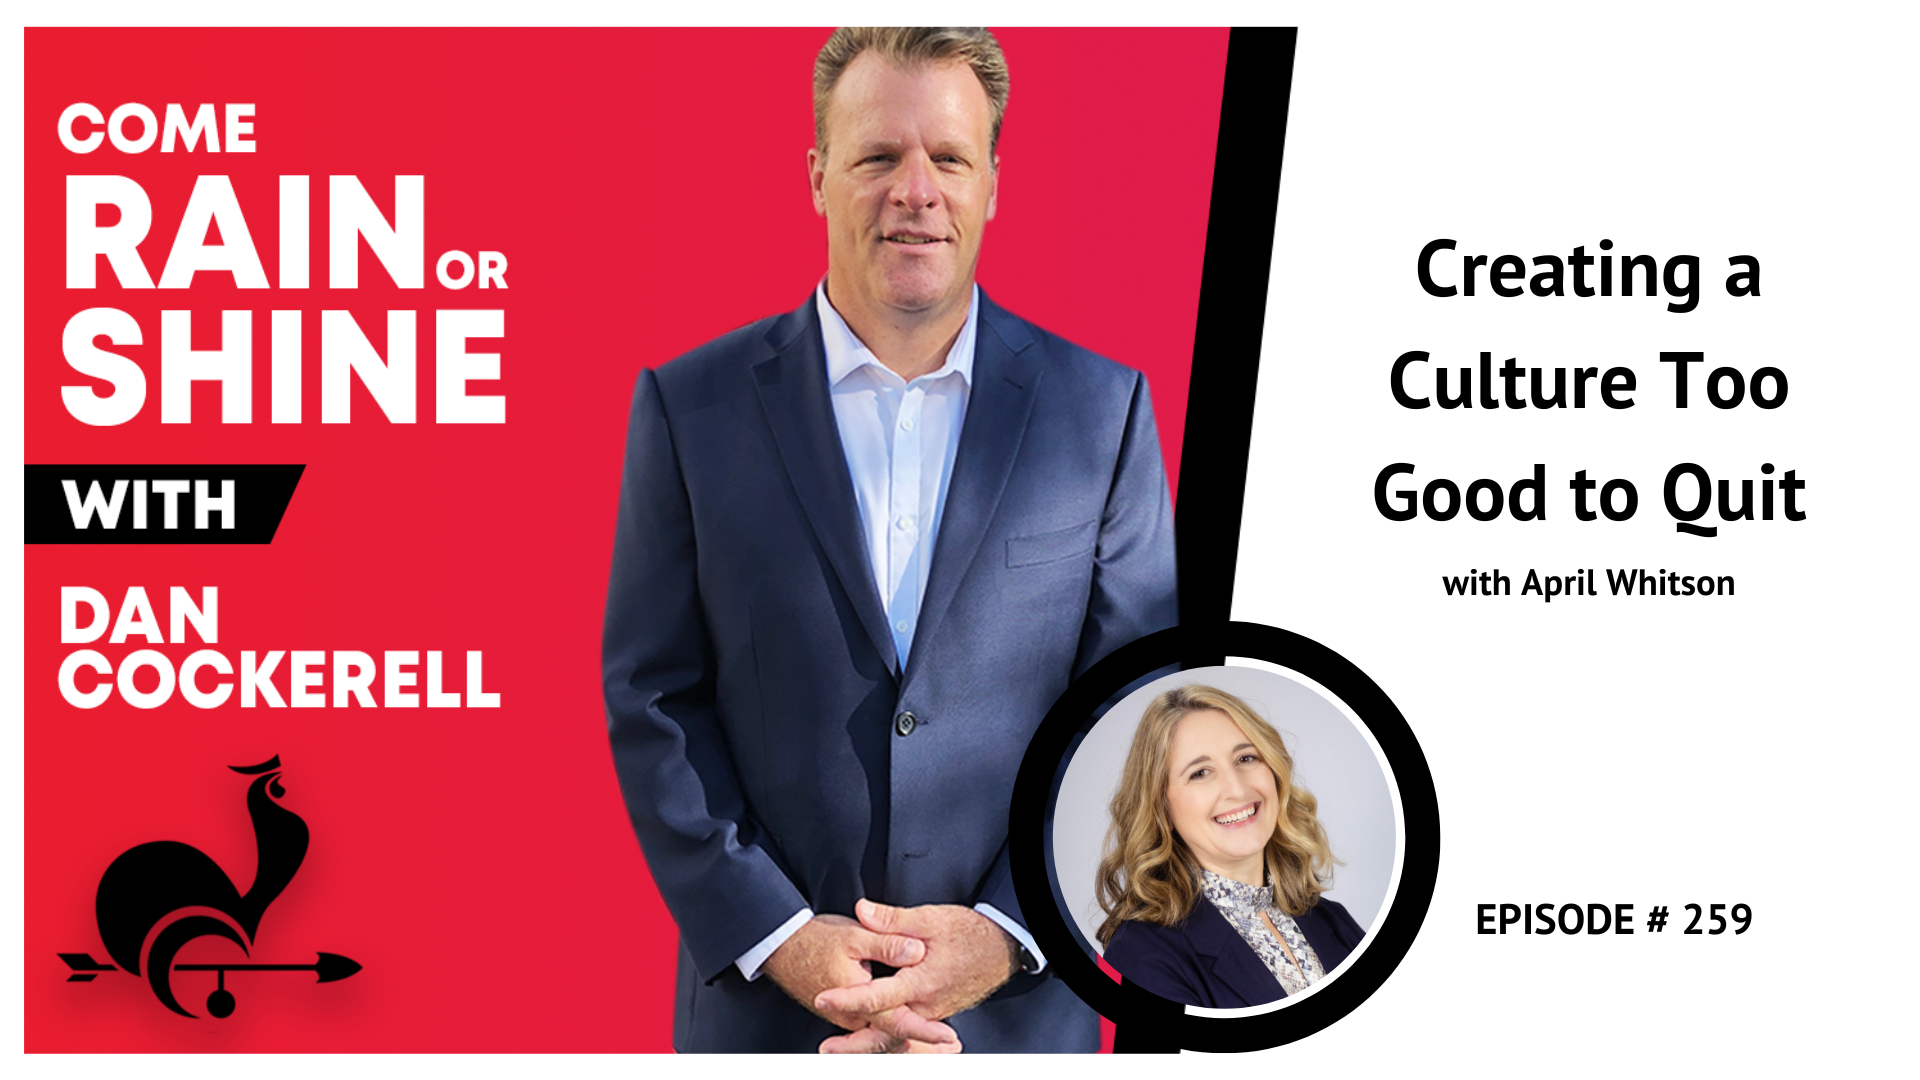 Come Rain or Shine Episode 259 April Whitson Creating a Culture Too Good to Quit